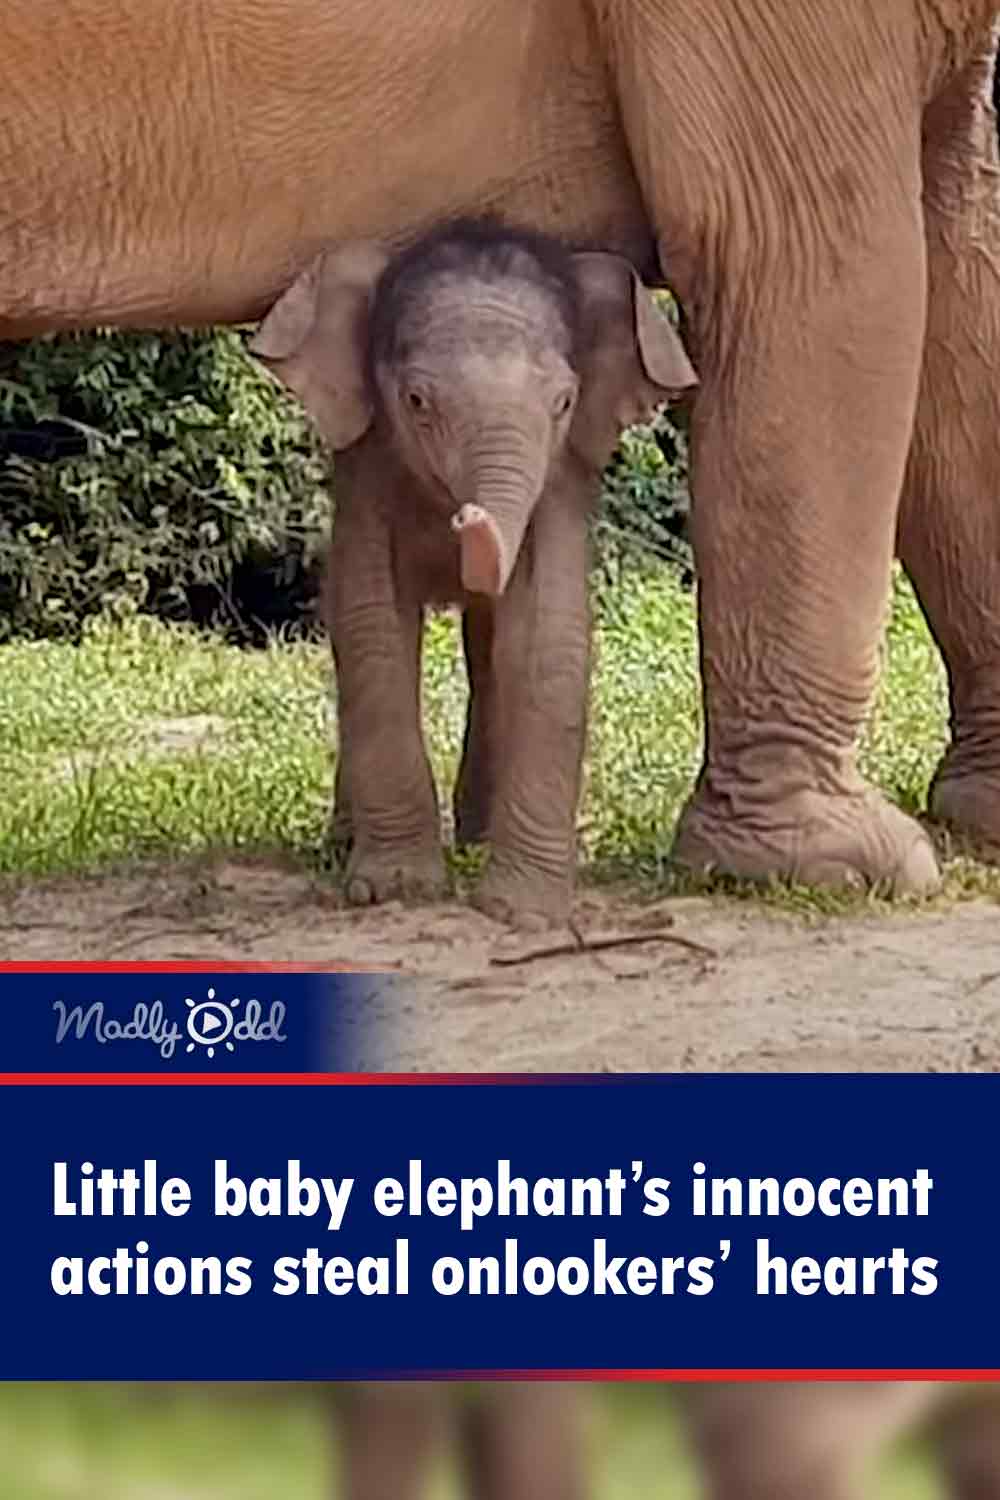 Little baby elephant’s innocent actions steal onlookers’ hearts